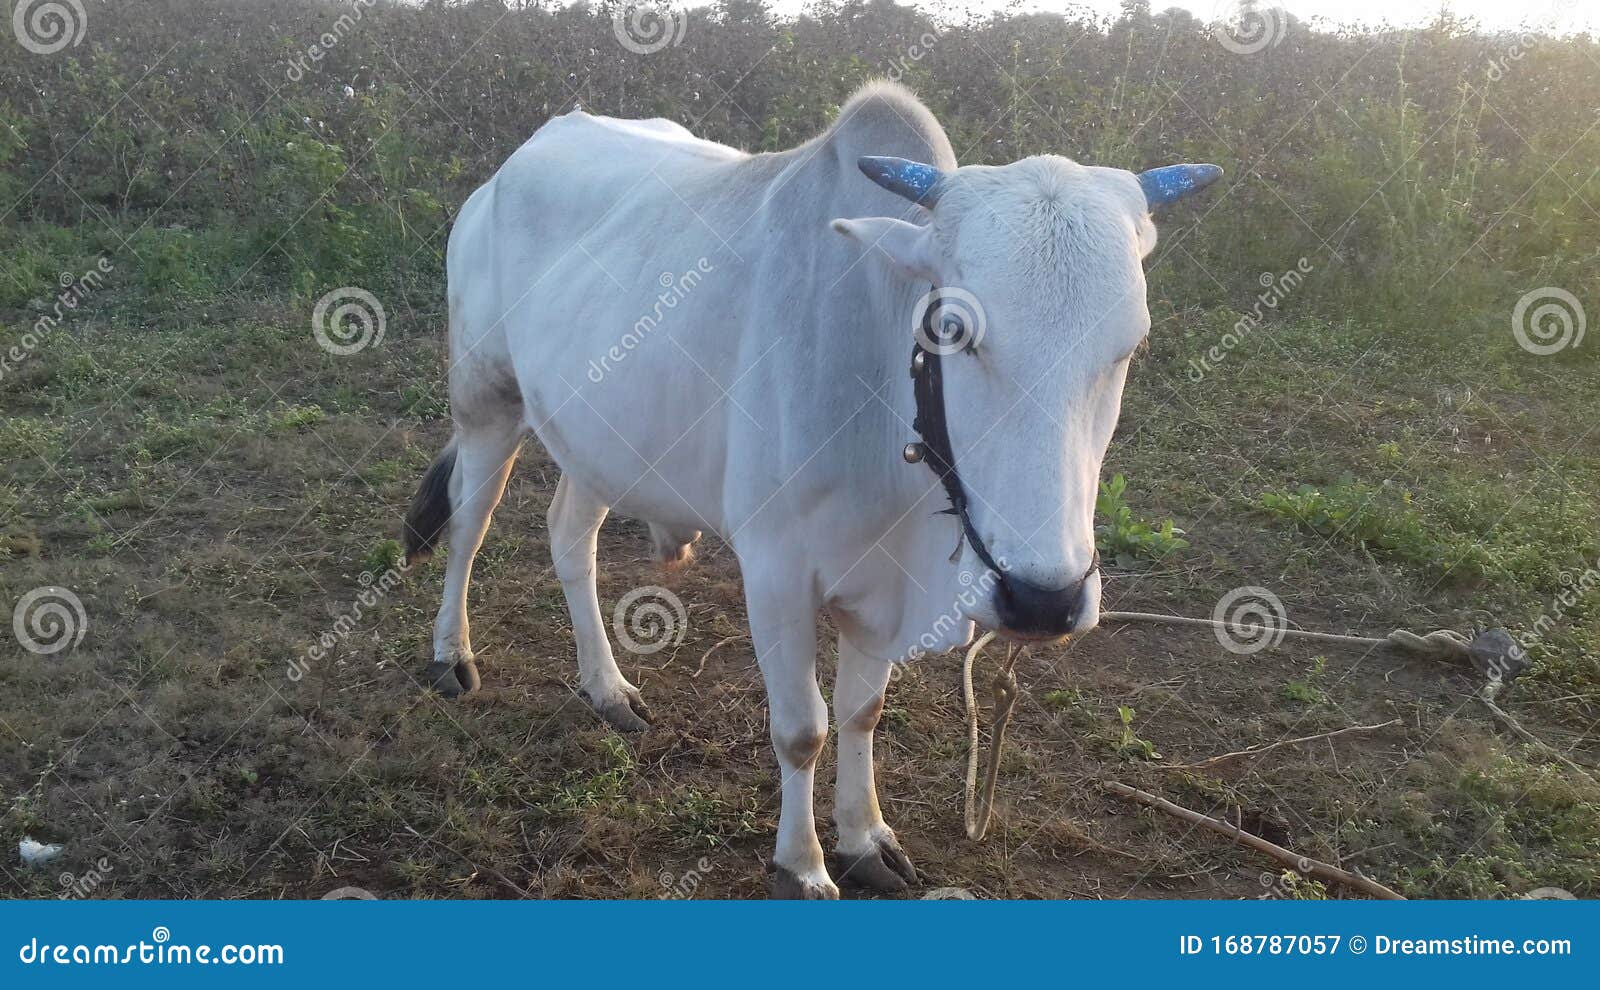 Ox bull stand urinating stock image. Image of eating 